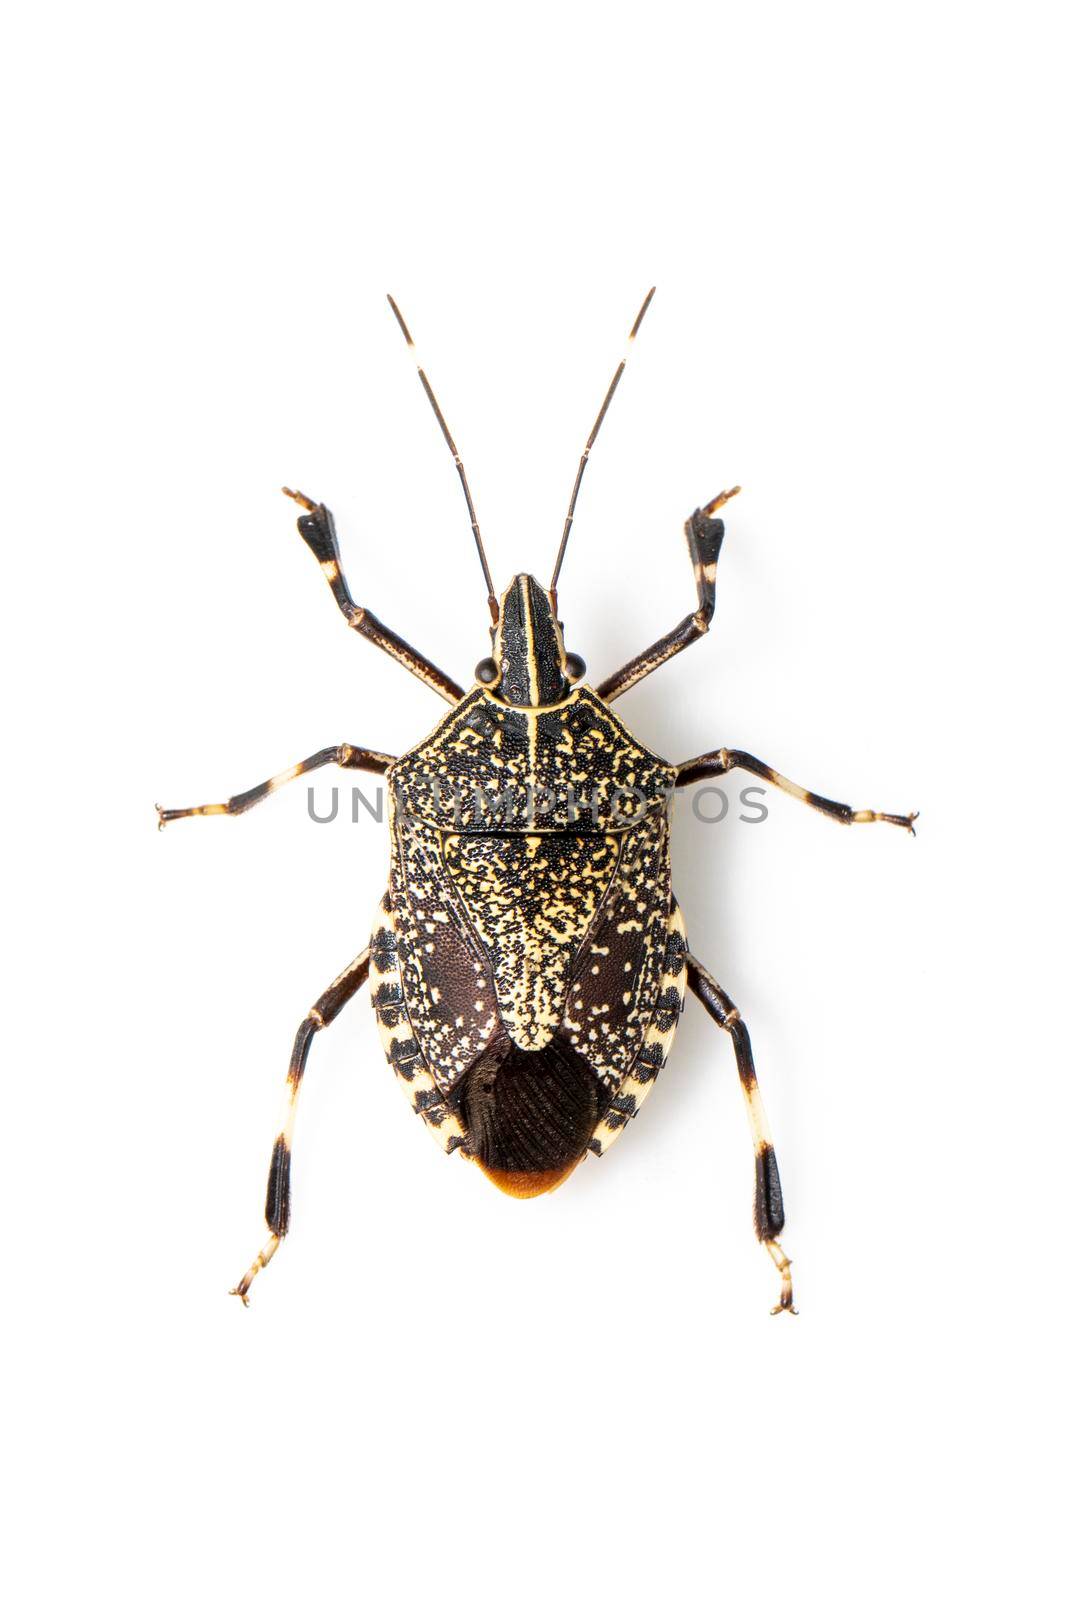 Image of yellow spotted stink bug isolated on white background. Animal. Insect.